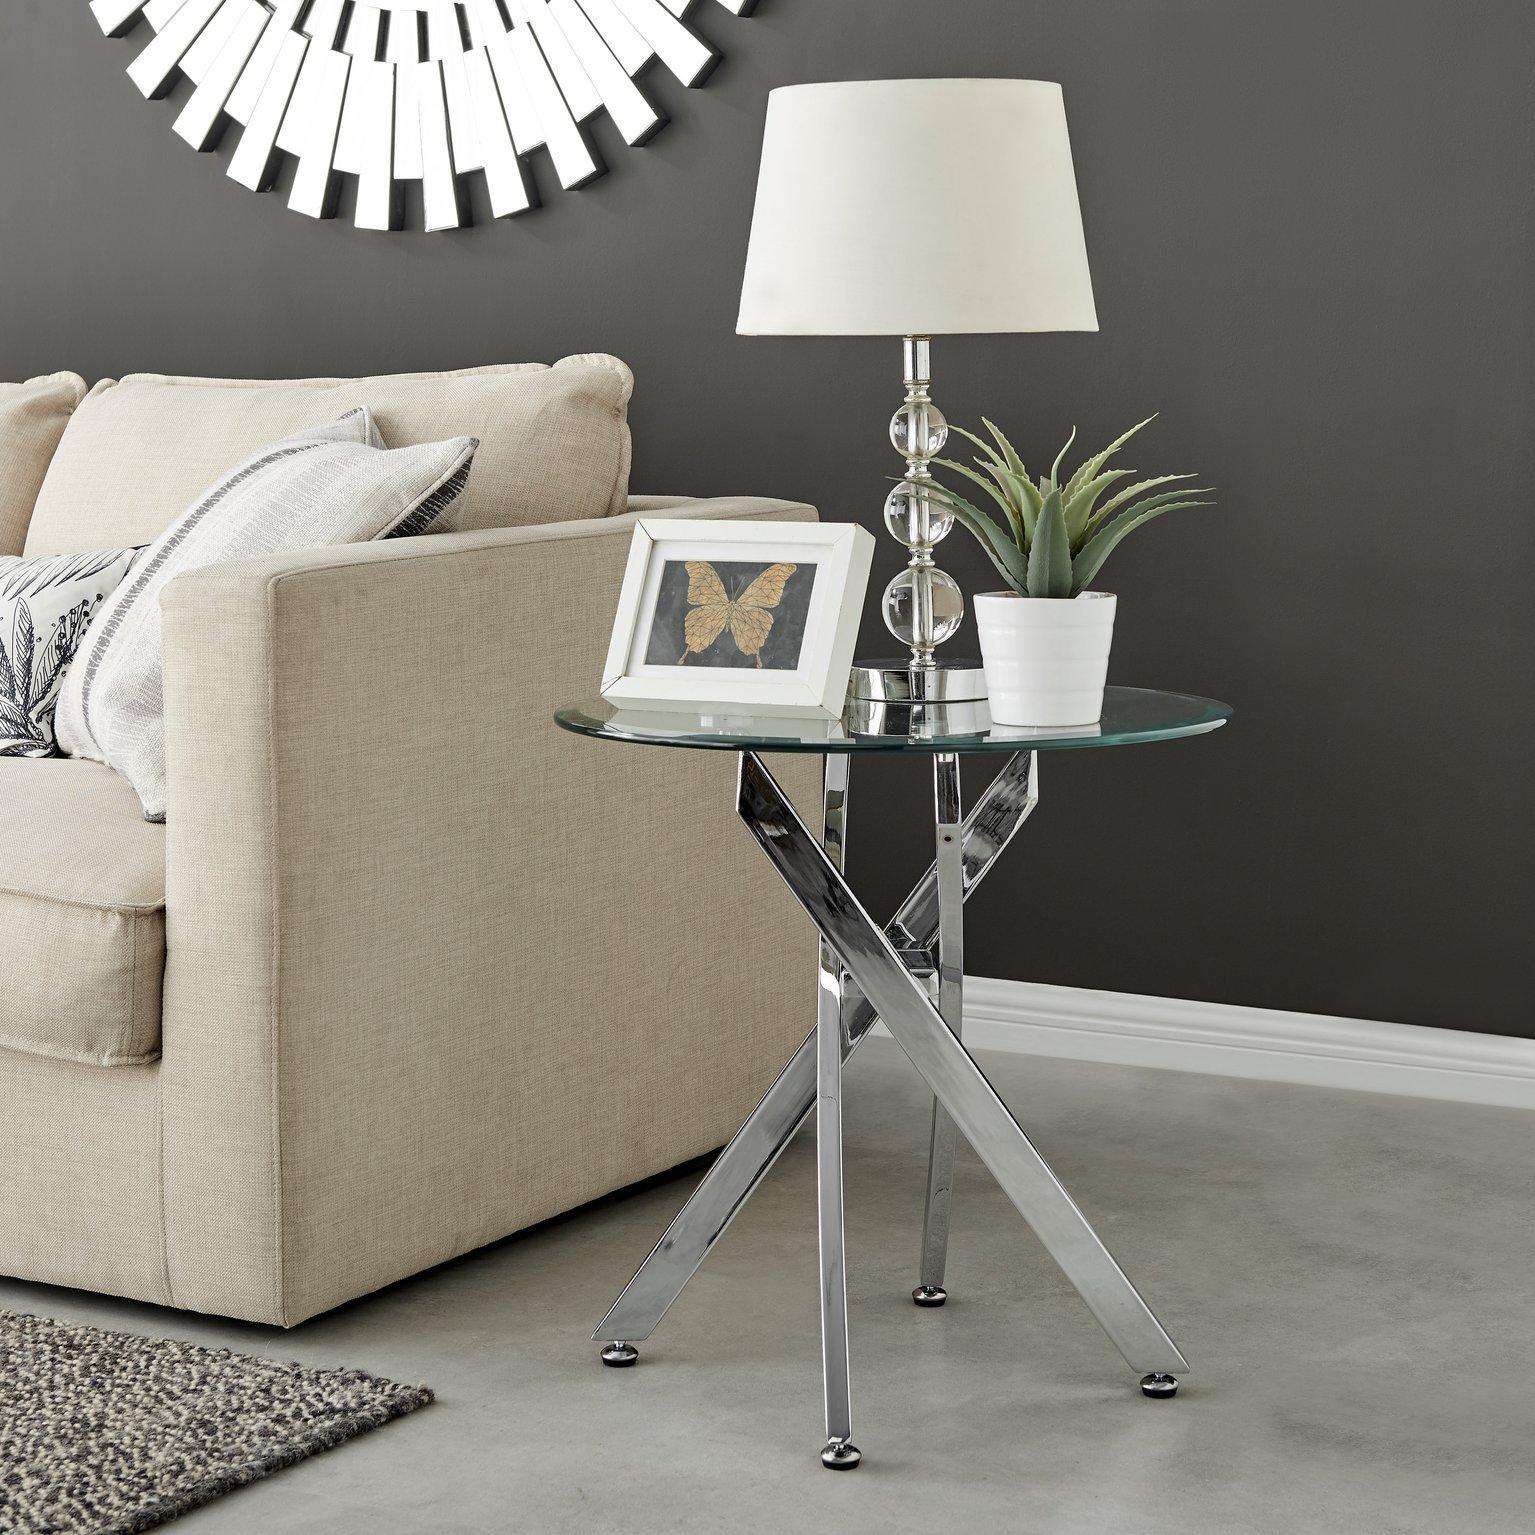 Novara Round Tempered Glass Side End Table with Angled Starburst Metal Legs for Modern Glam Minimali